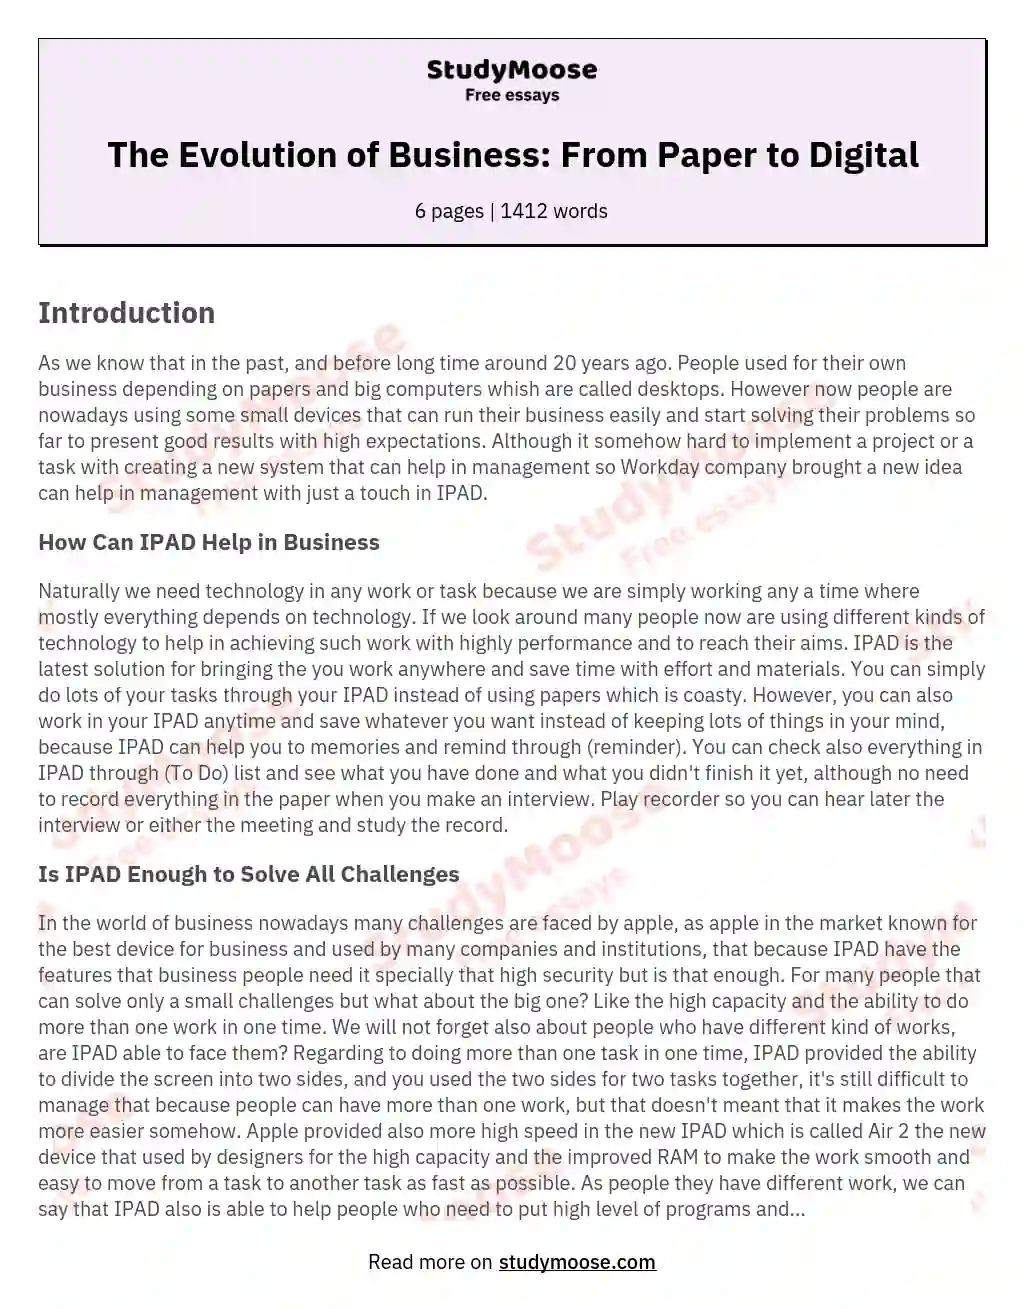 The Evolution of Business: From Paper to Digital essay